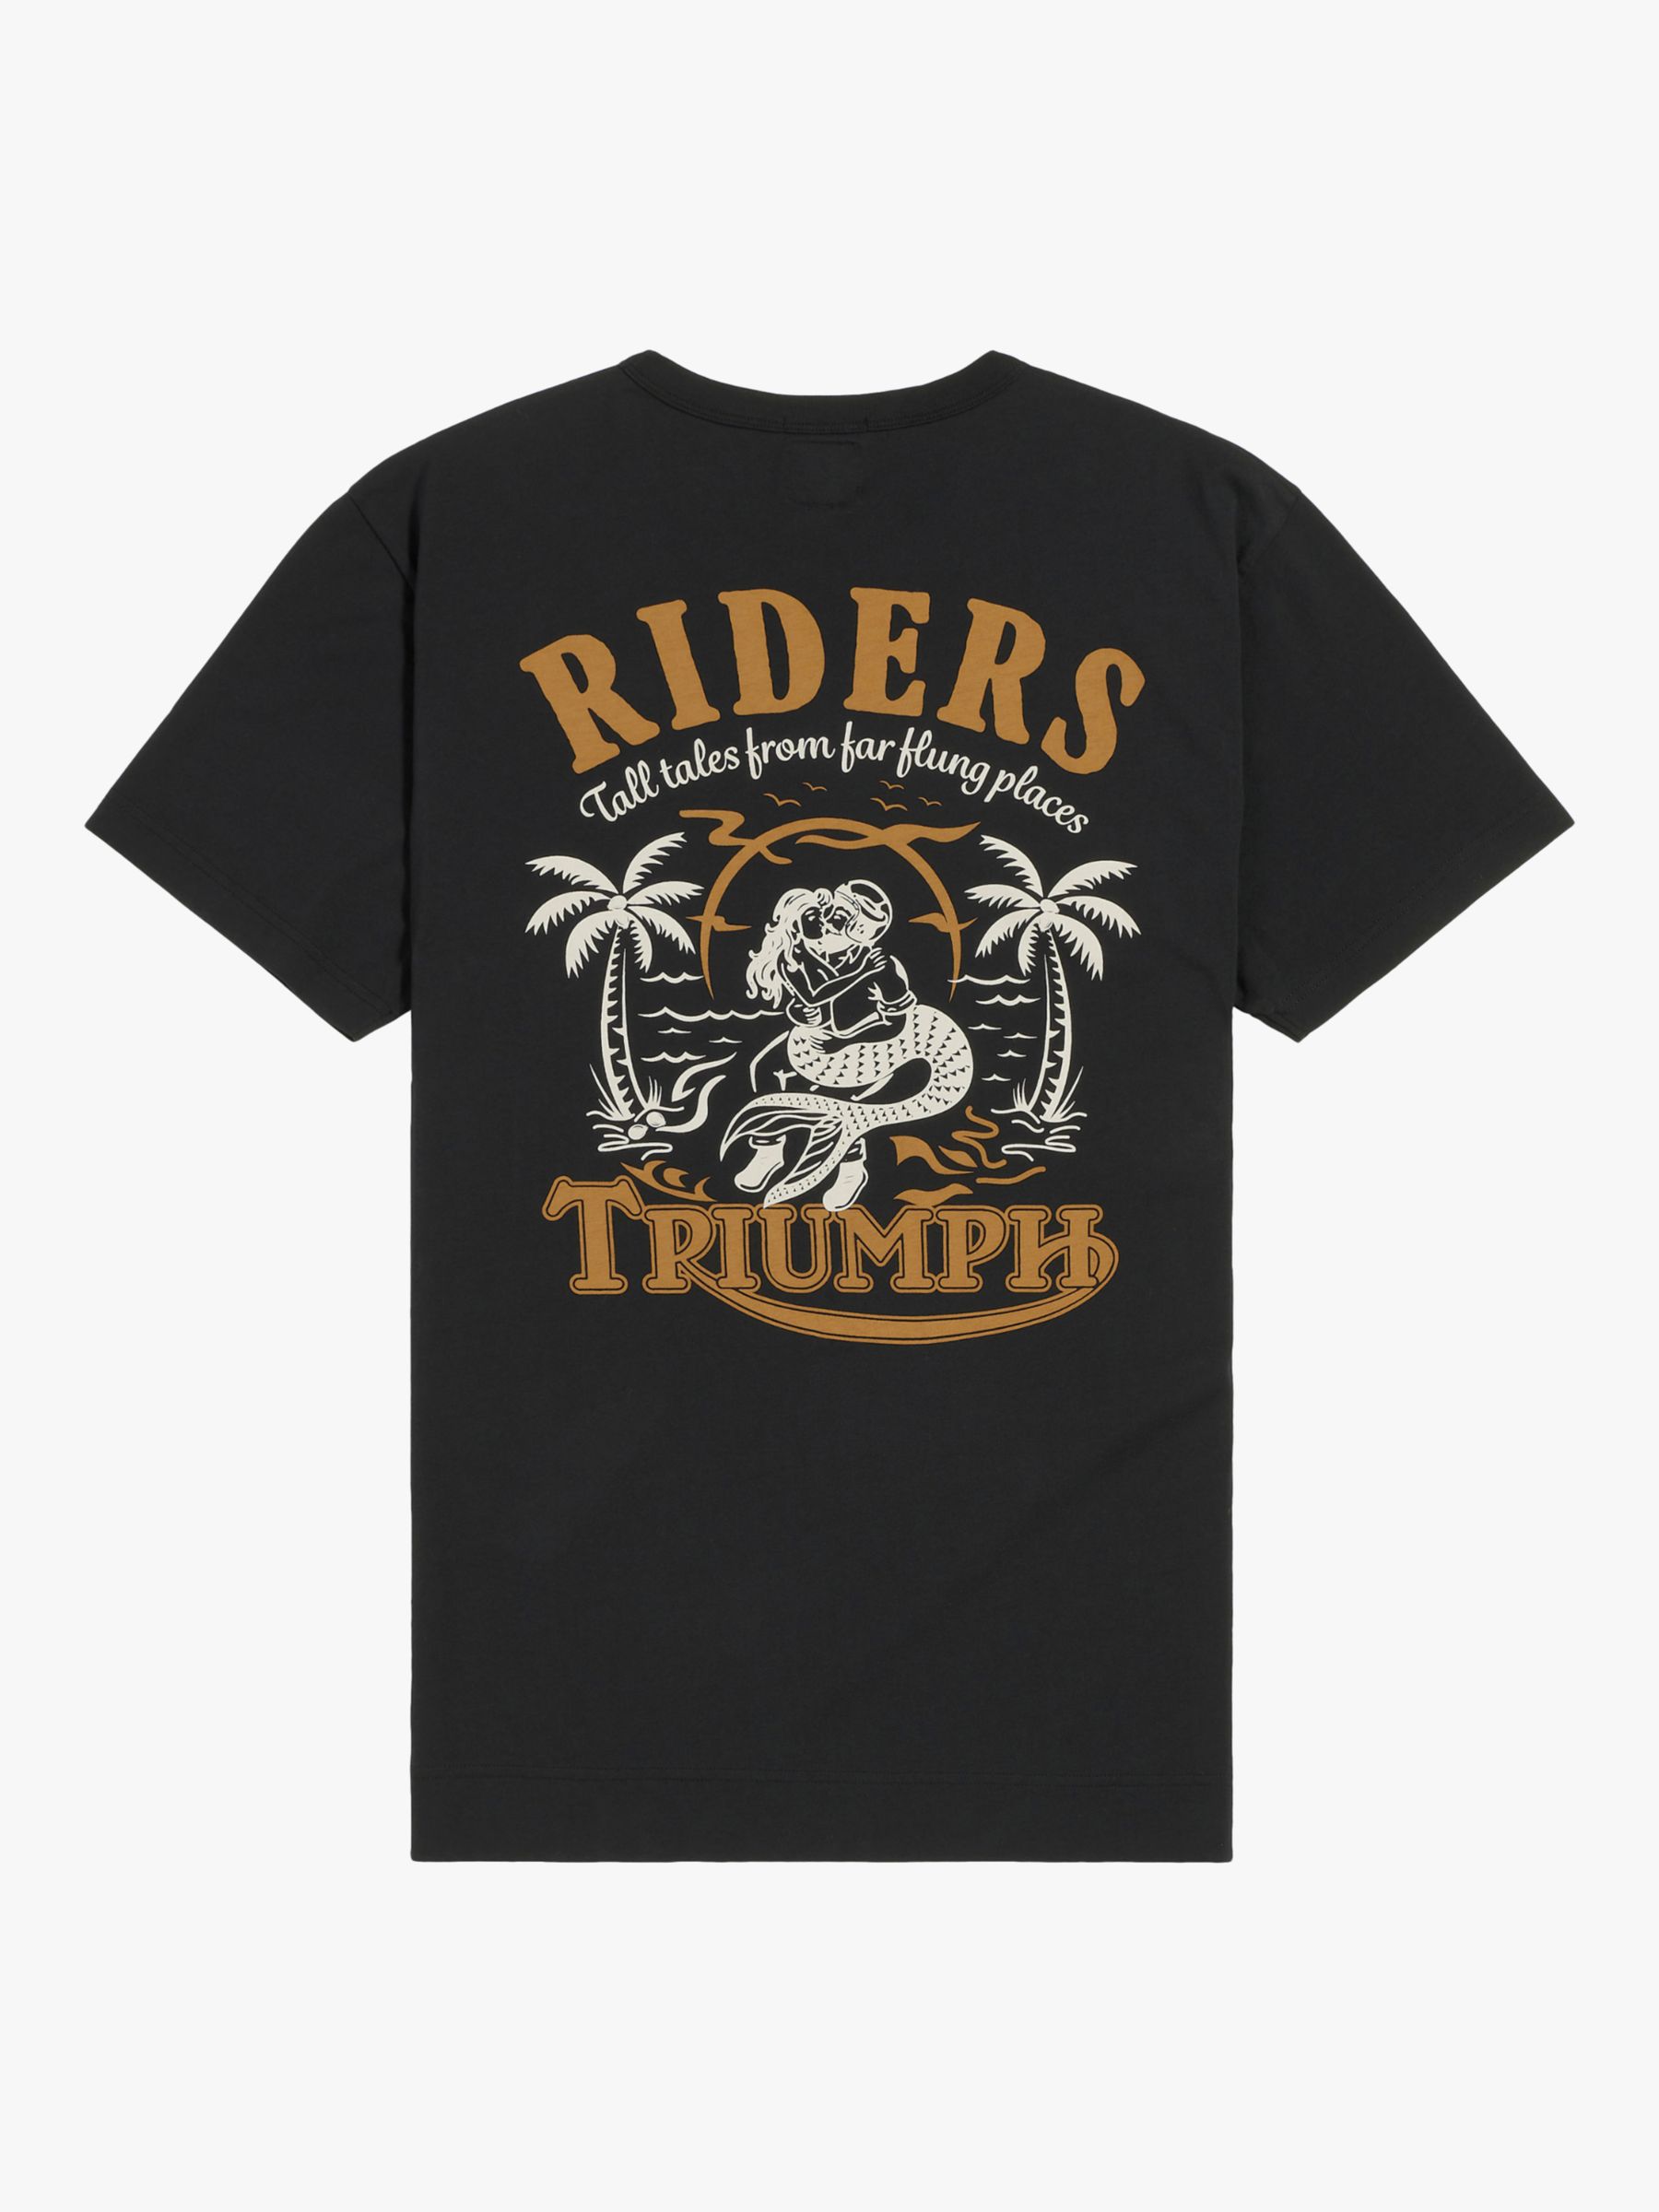 Triumph Motorcycles Tall Tales Graphic T-Shirt, Black, S